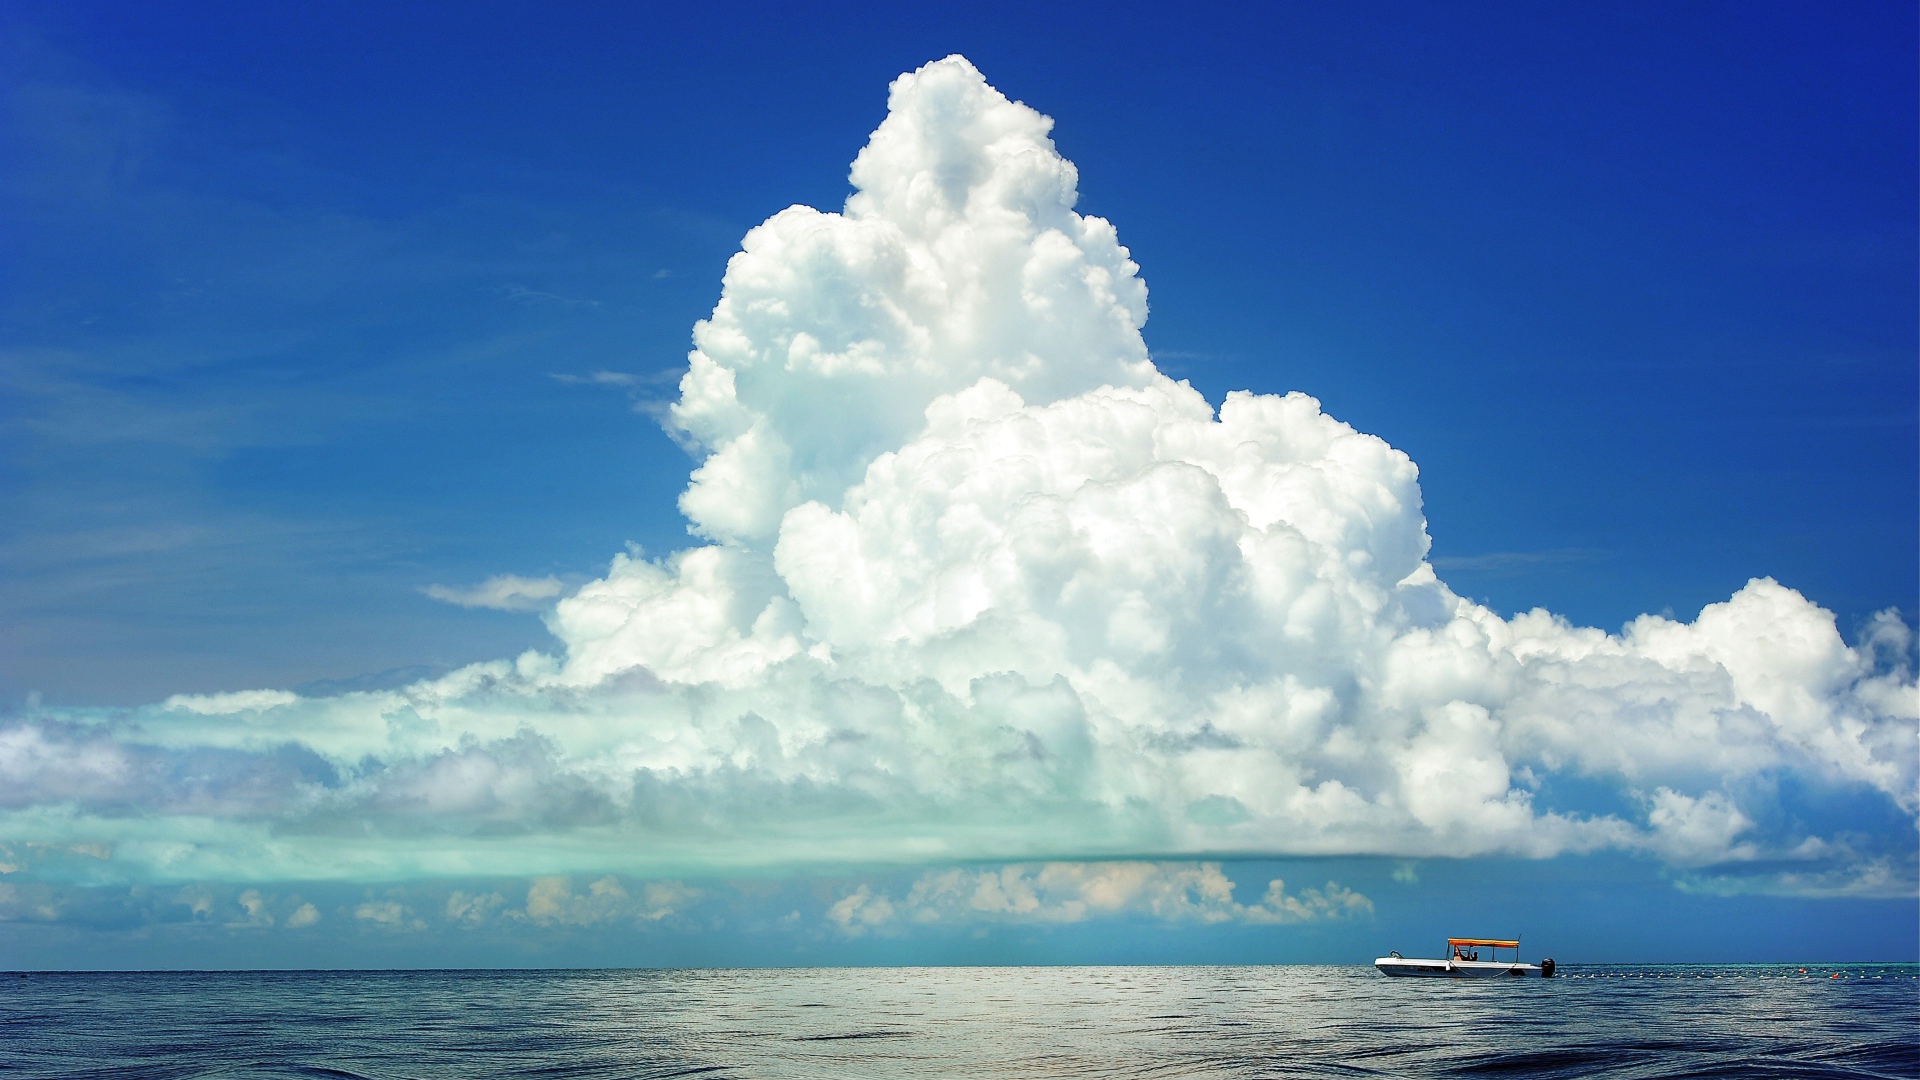 Large white cloud in the blue sky over the sea